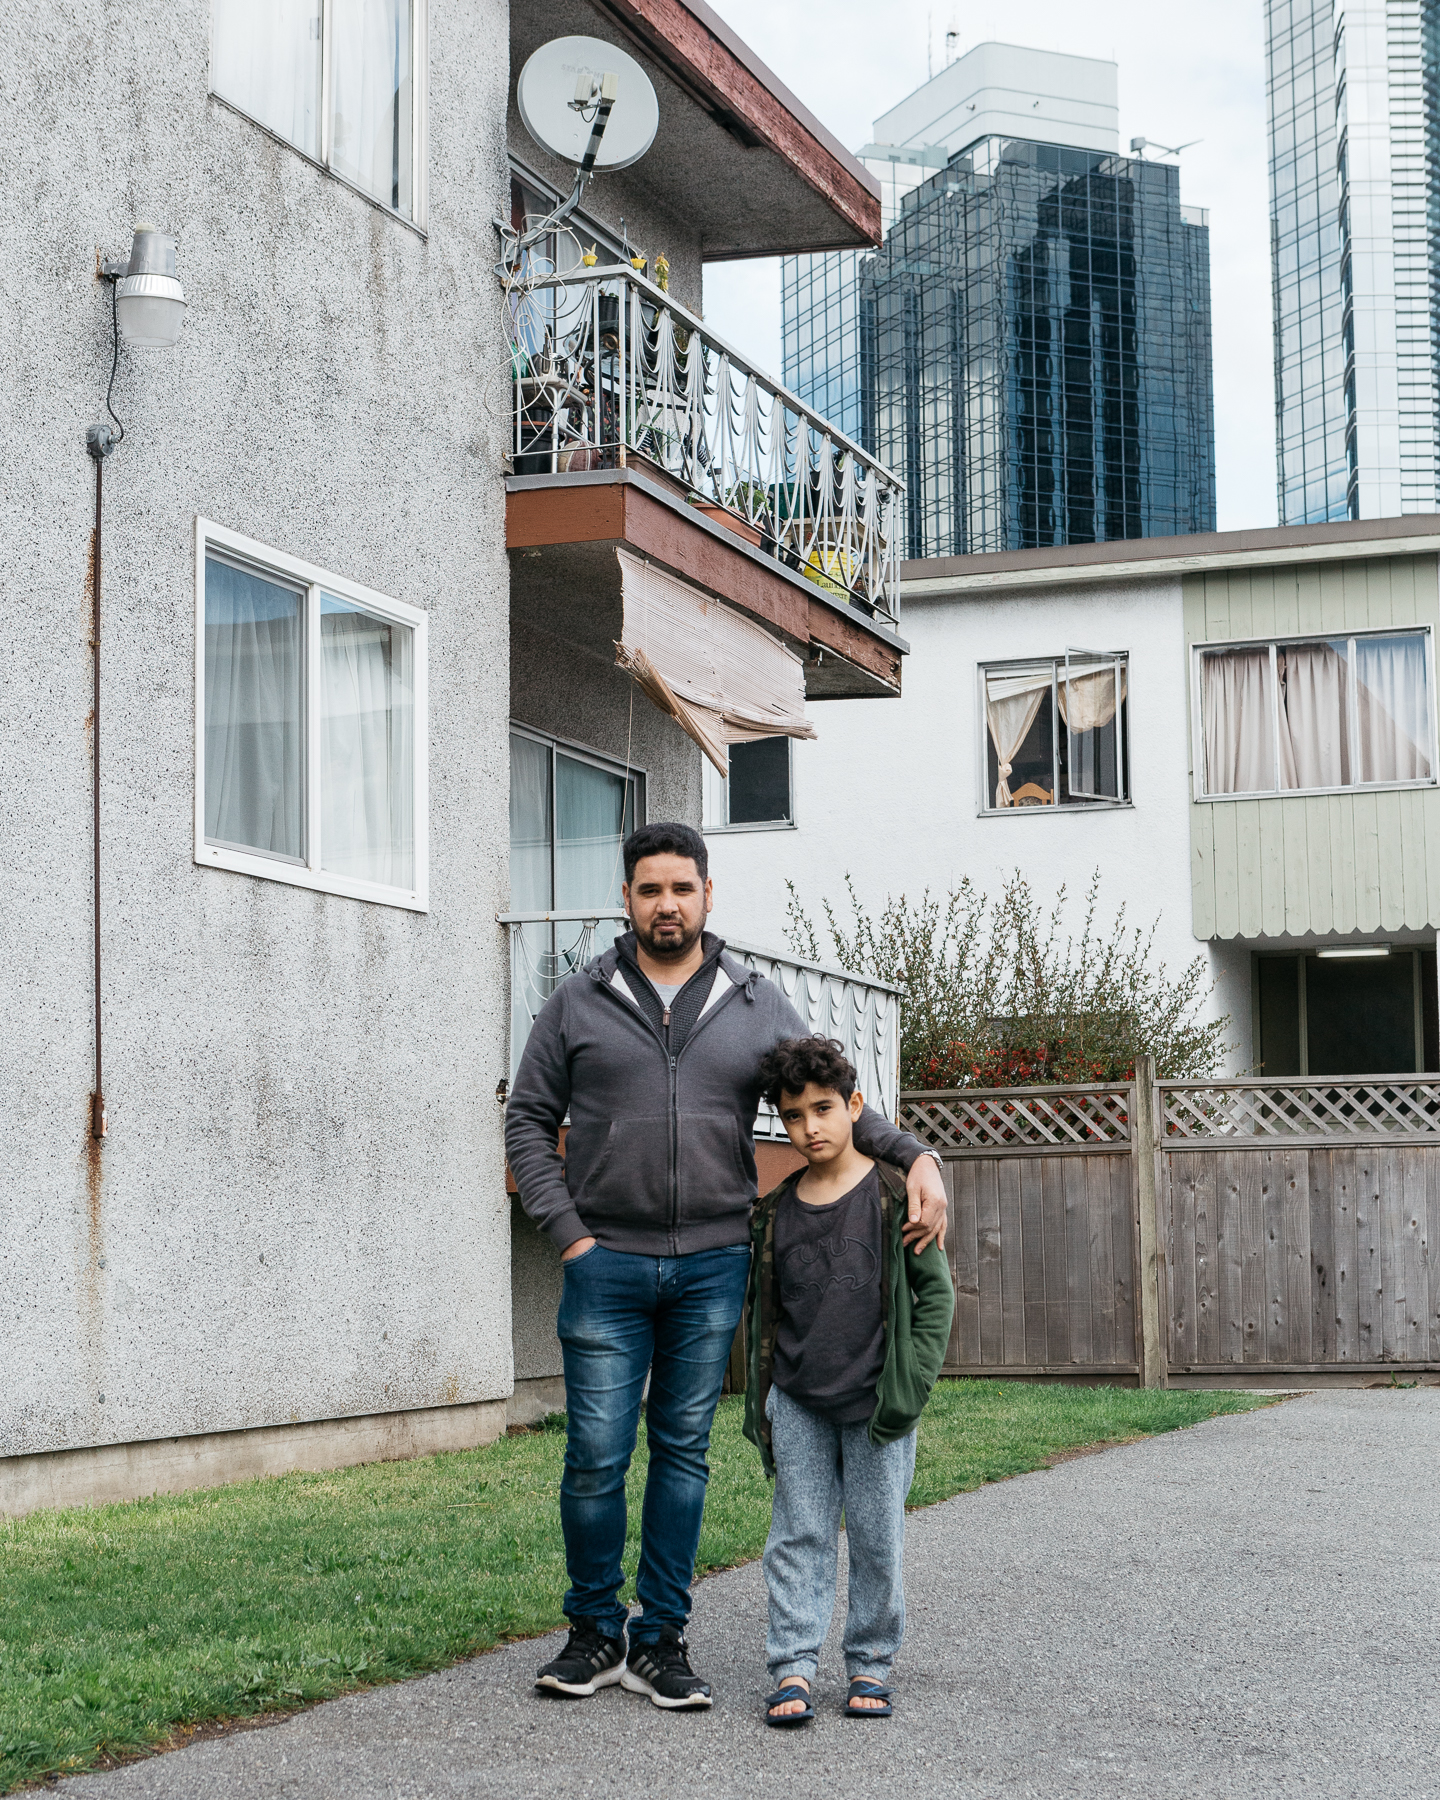   Dheyaa and his son:    How long have you lived in Metrotown?   Since 2014.   How does the housing crisis affect you?   We have mice and cockroaches in our suite and the building.   Did you receive any help or support to find alternate housing?   No